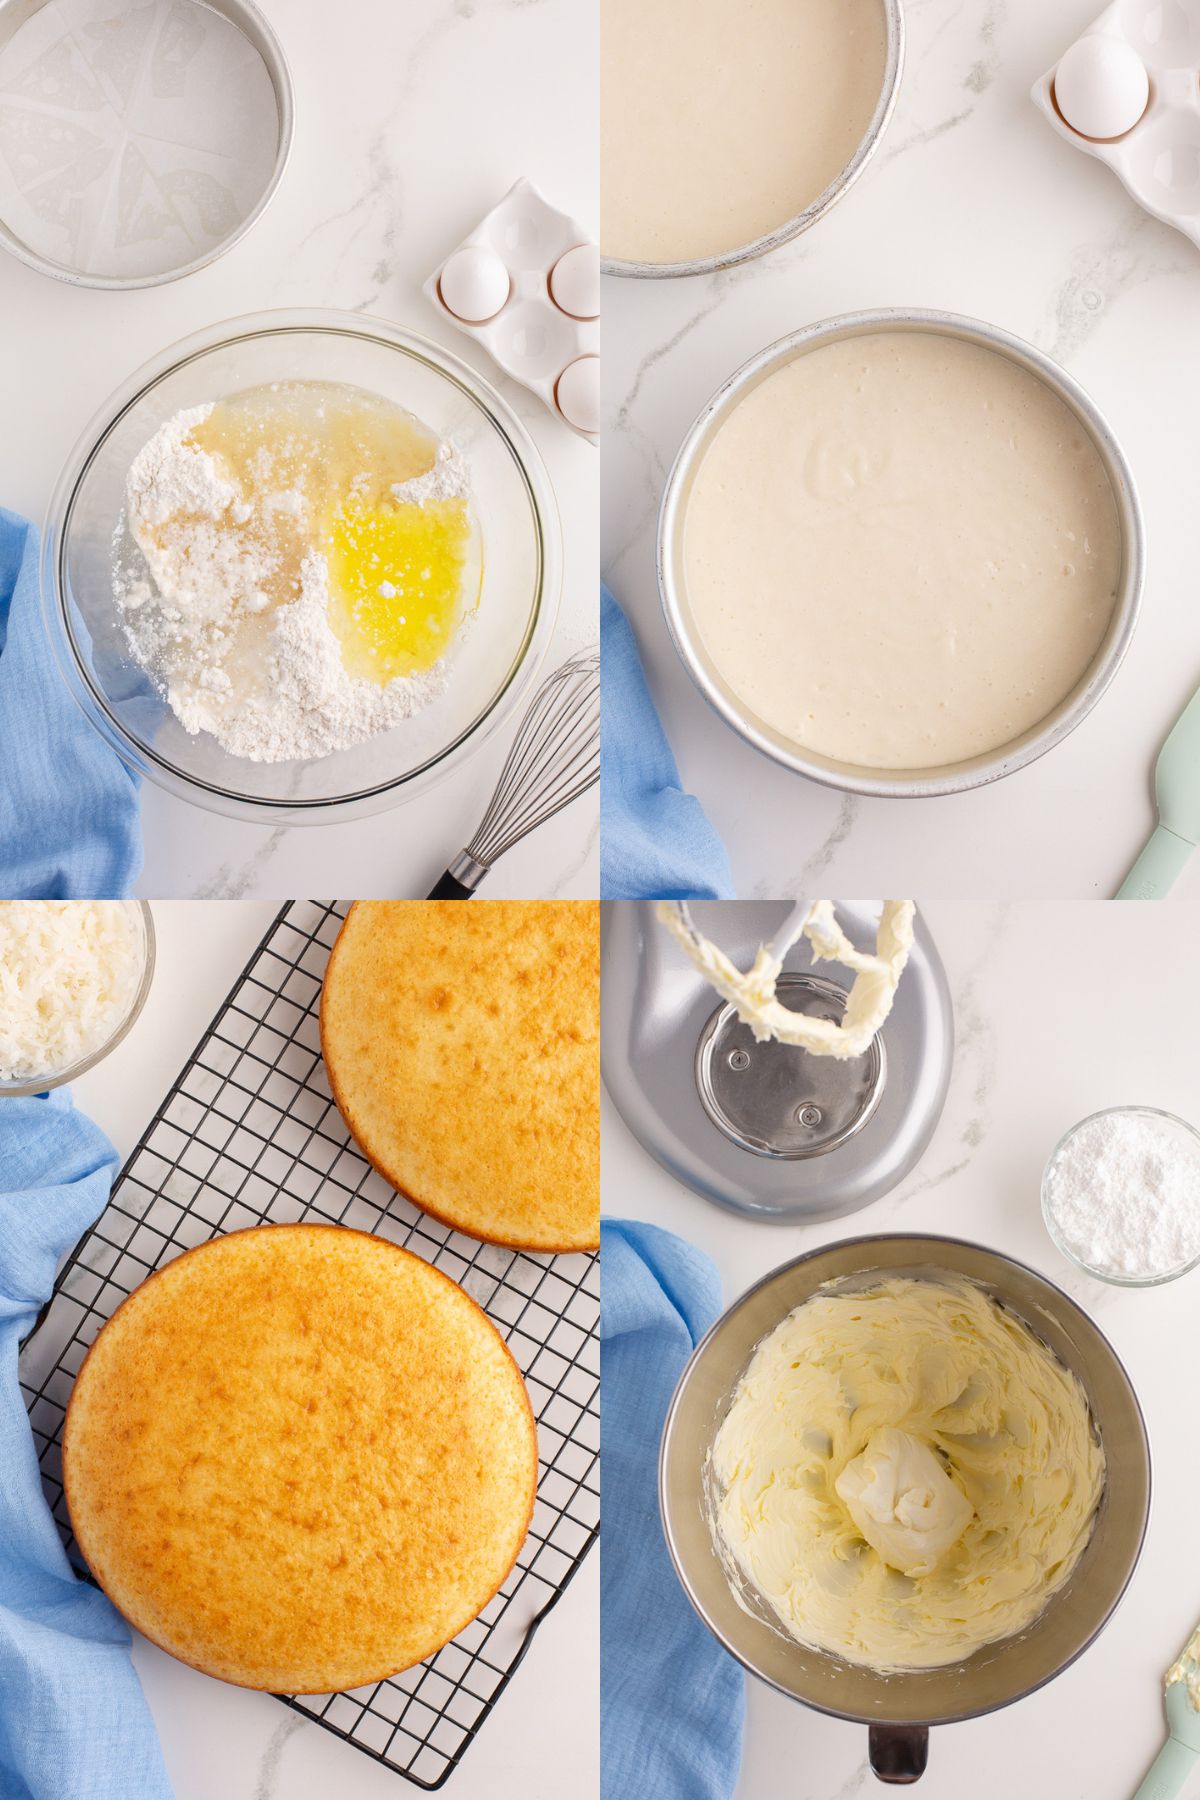 Step by step images for how to make the cake batter and the starting step of making the icing. 